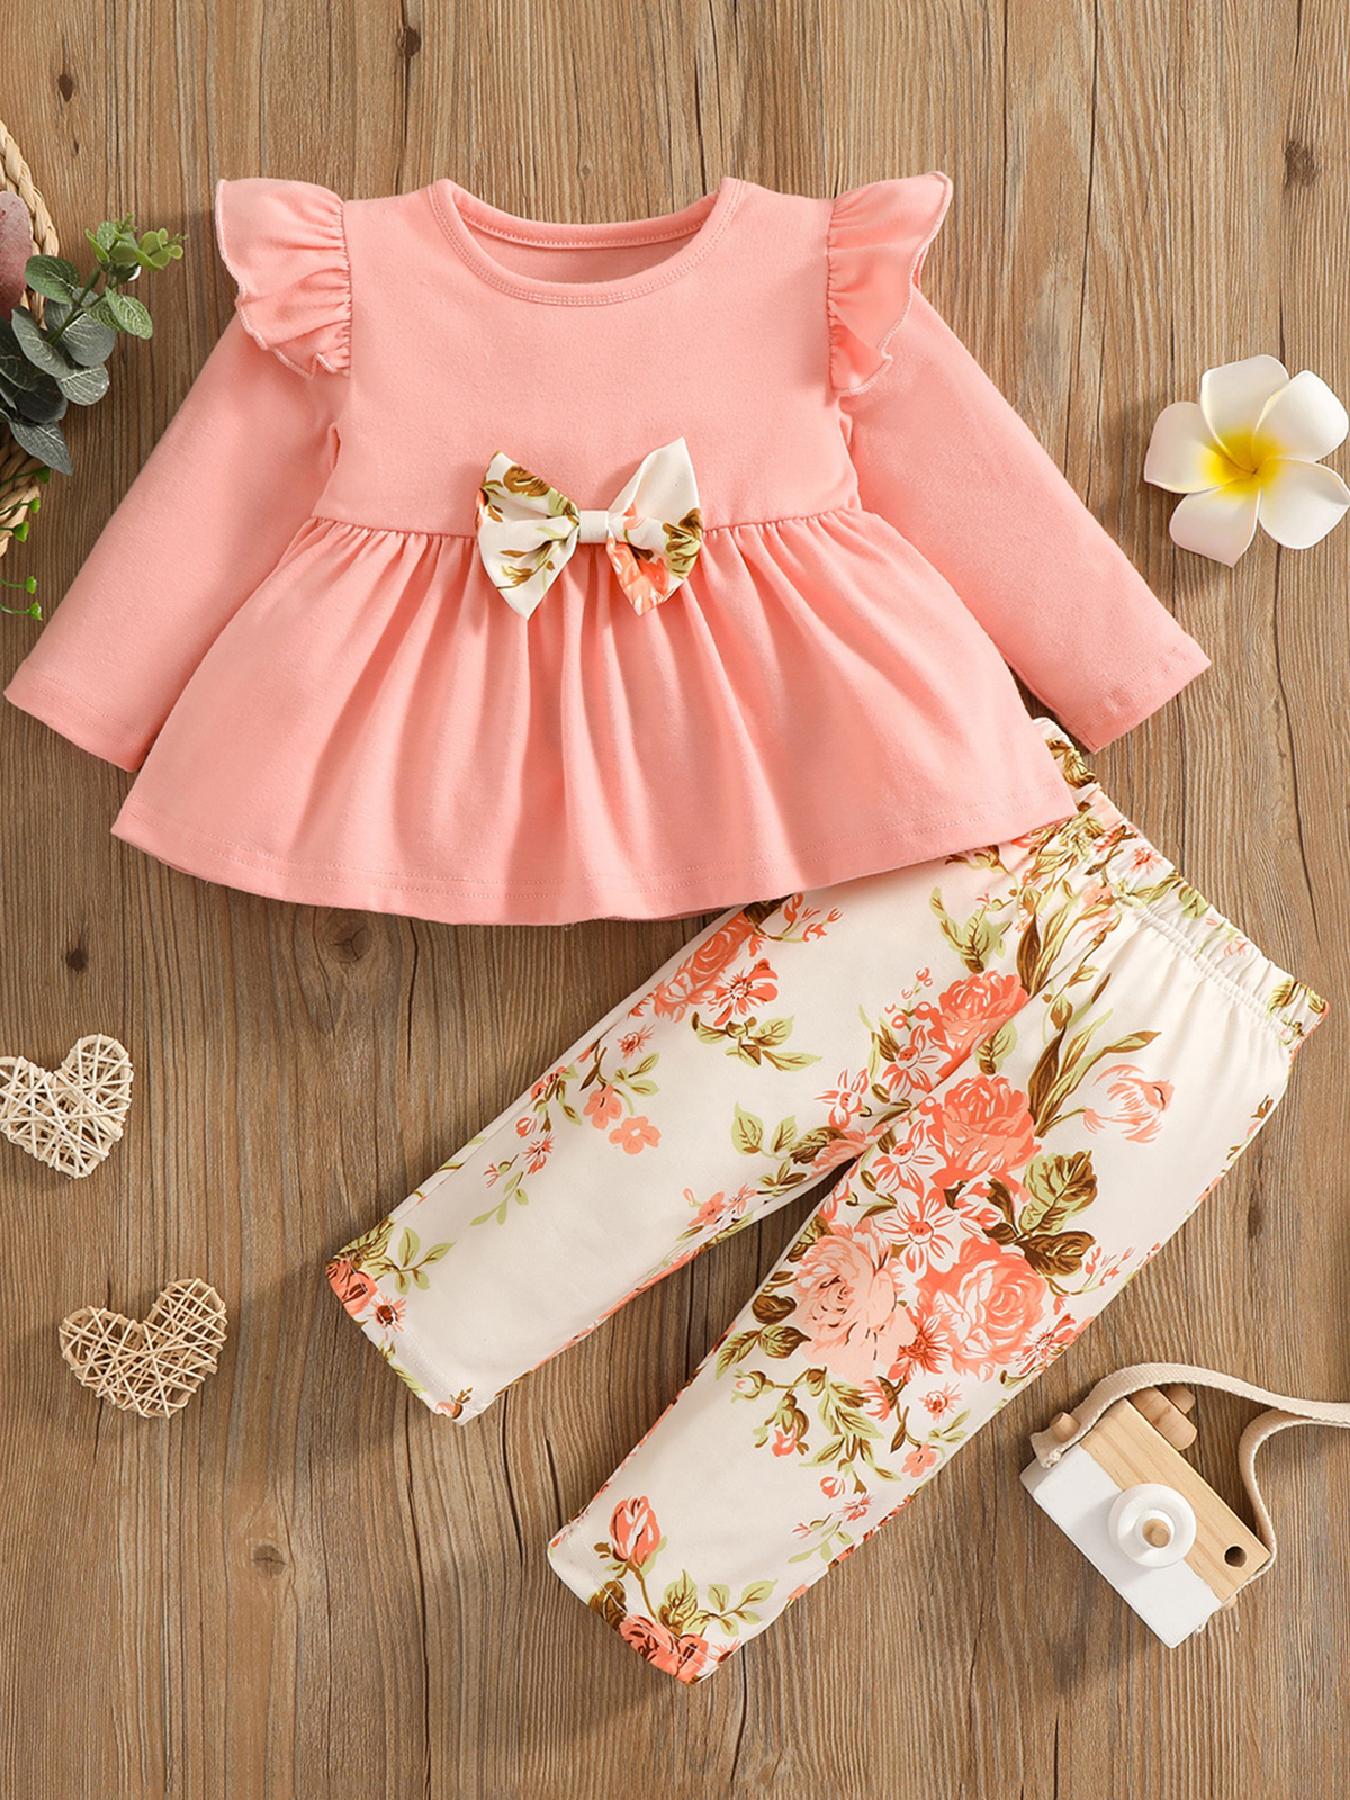 100% Cotton 2pcs Baby Girl Floral Embroidered Button Ruffle Tank Top and Shorts Set